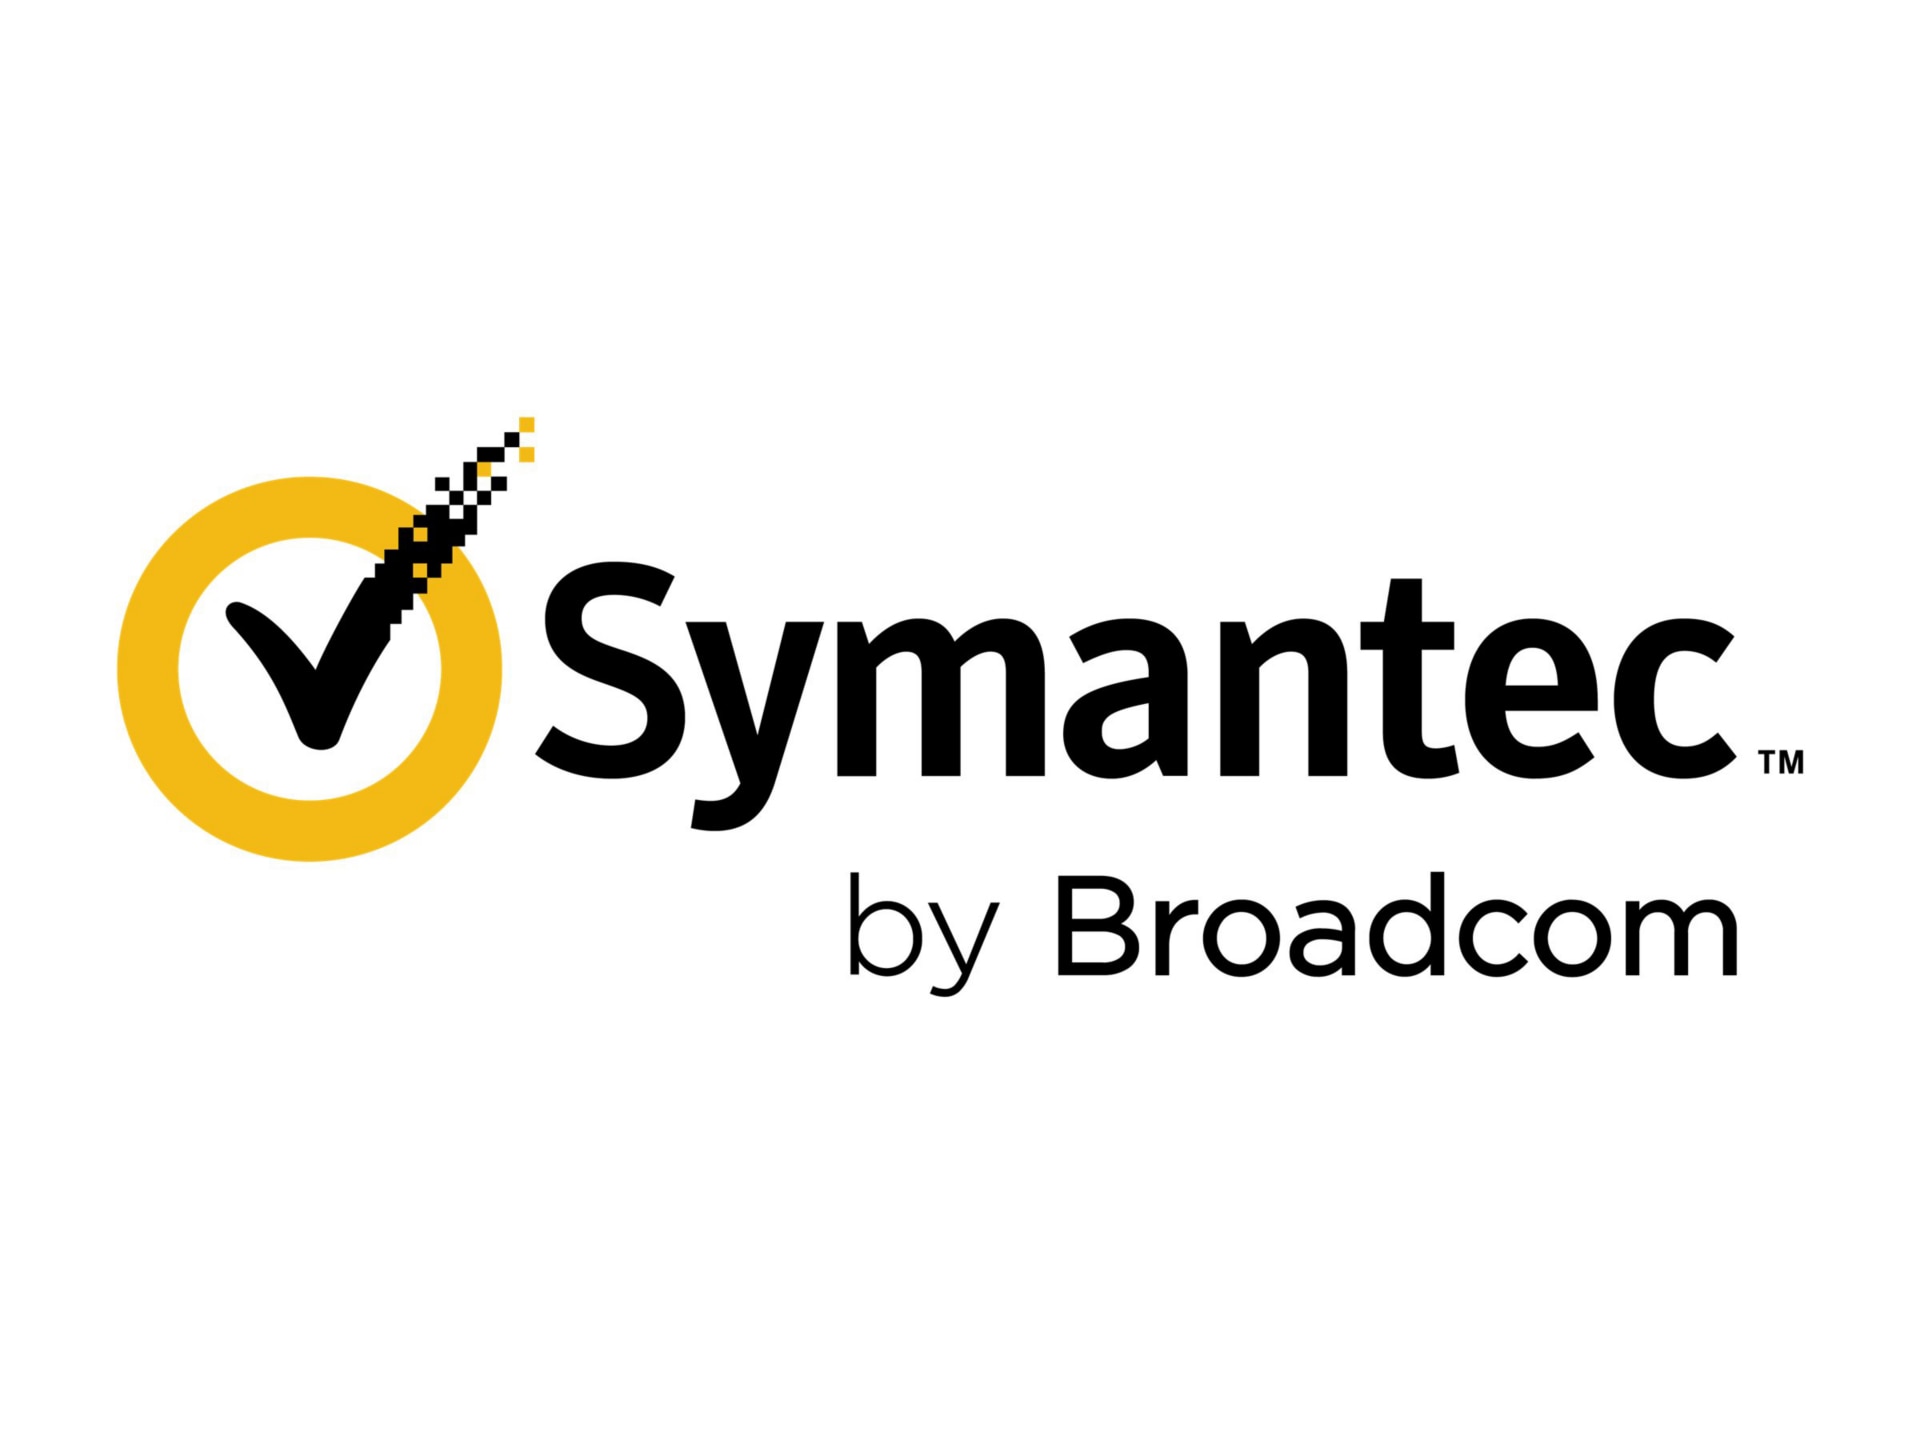 Symantec - initial subscription license (1 year) + Support - 1 user